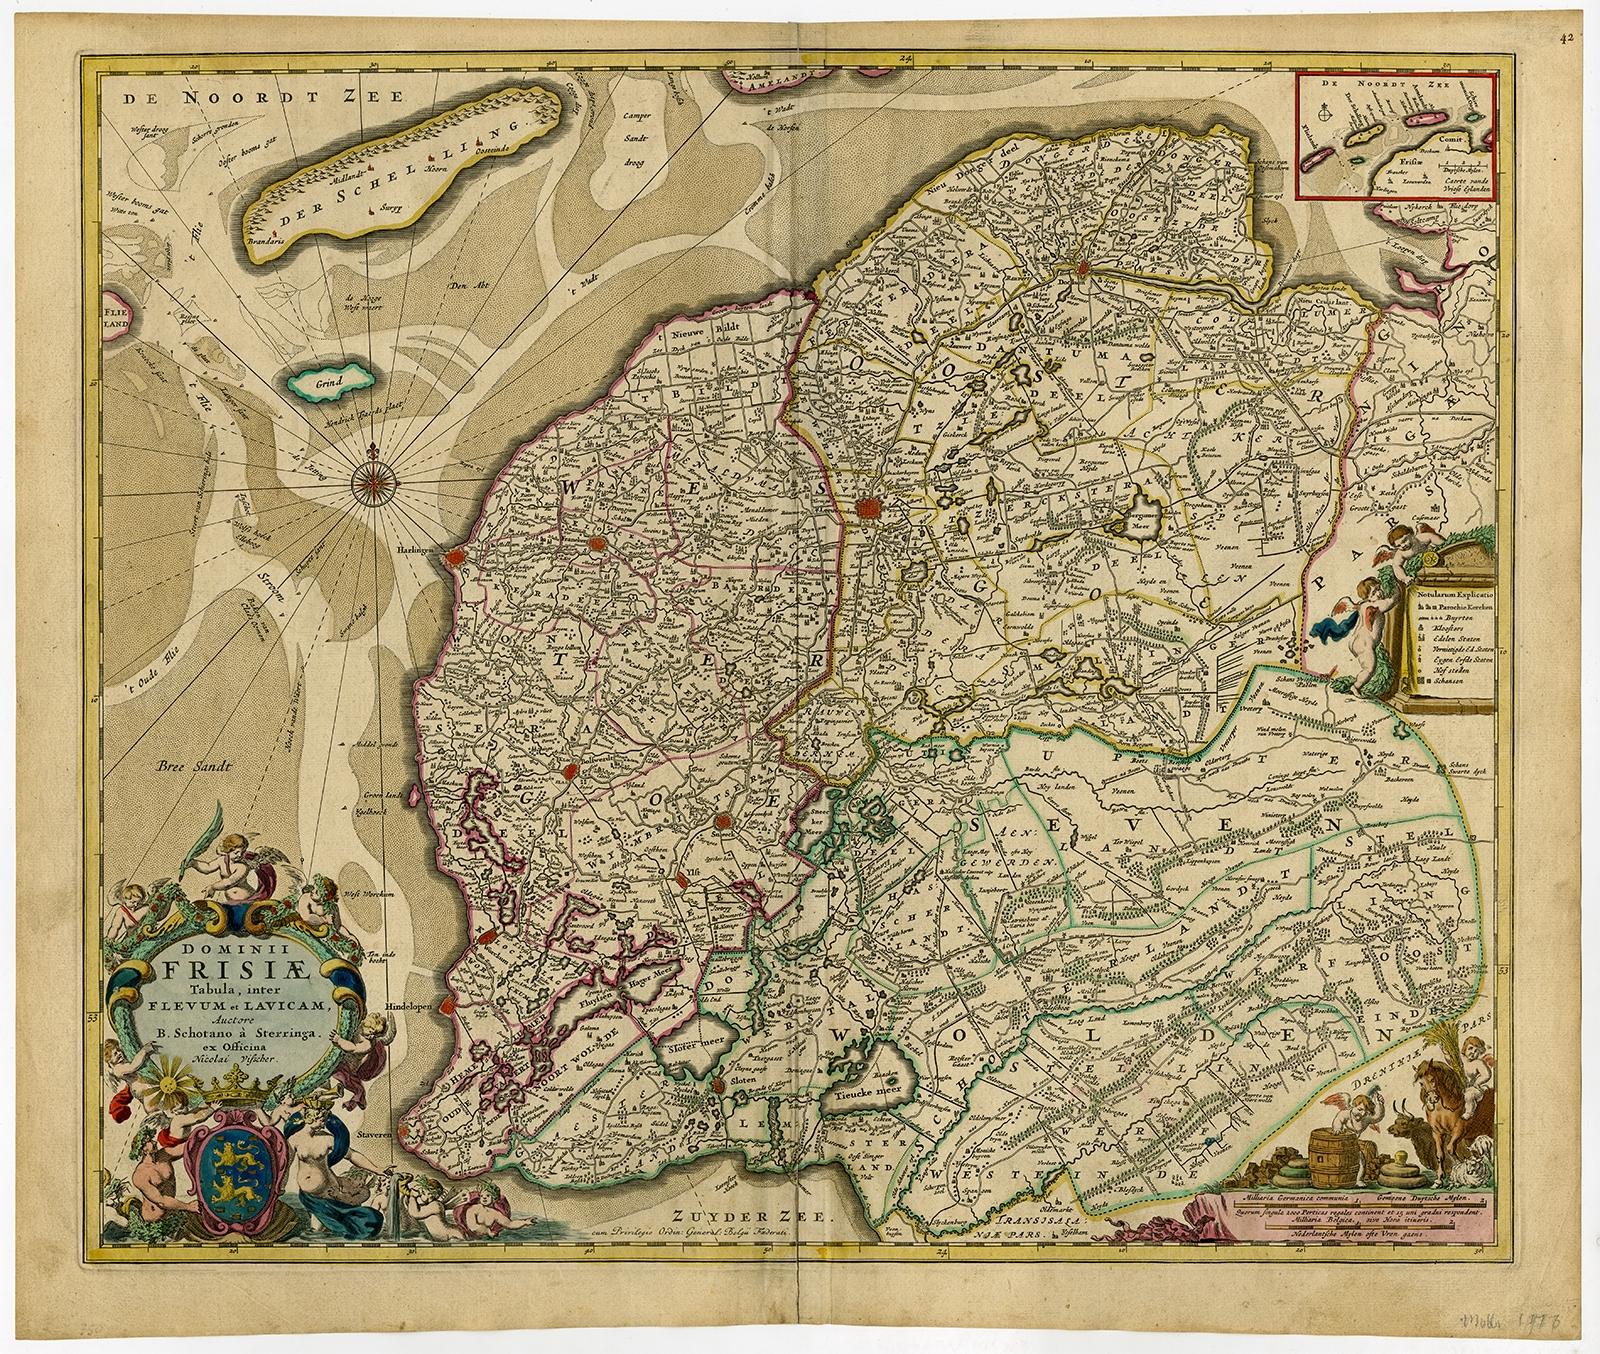 Antique print, titled: 'Dominii Frisiae Tabula, inter Flevum et Lavicum (…)' 

This large copper engraved map details the coastline of Friesland and Terschelling. At east is a part of Groningen. The main cities are colored in red. The very